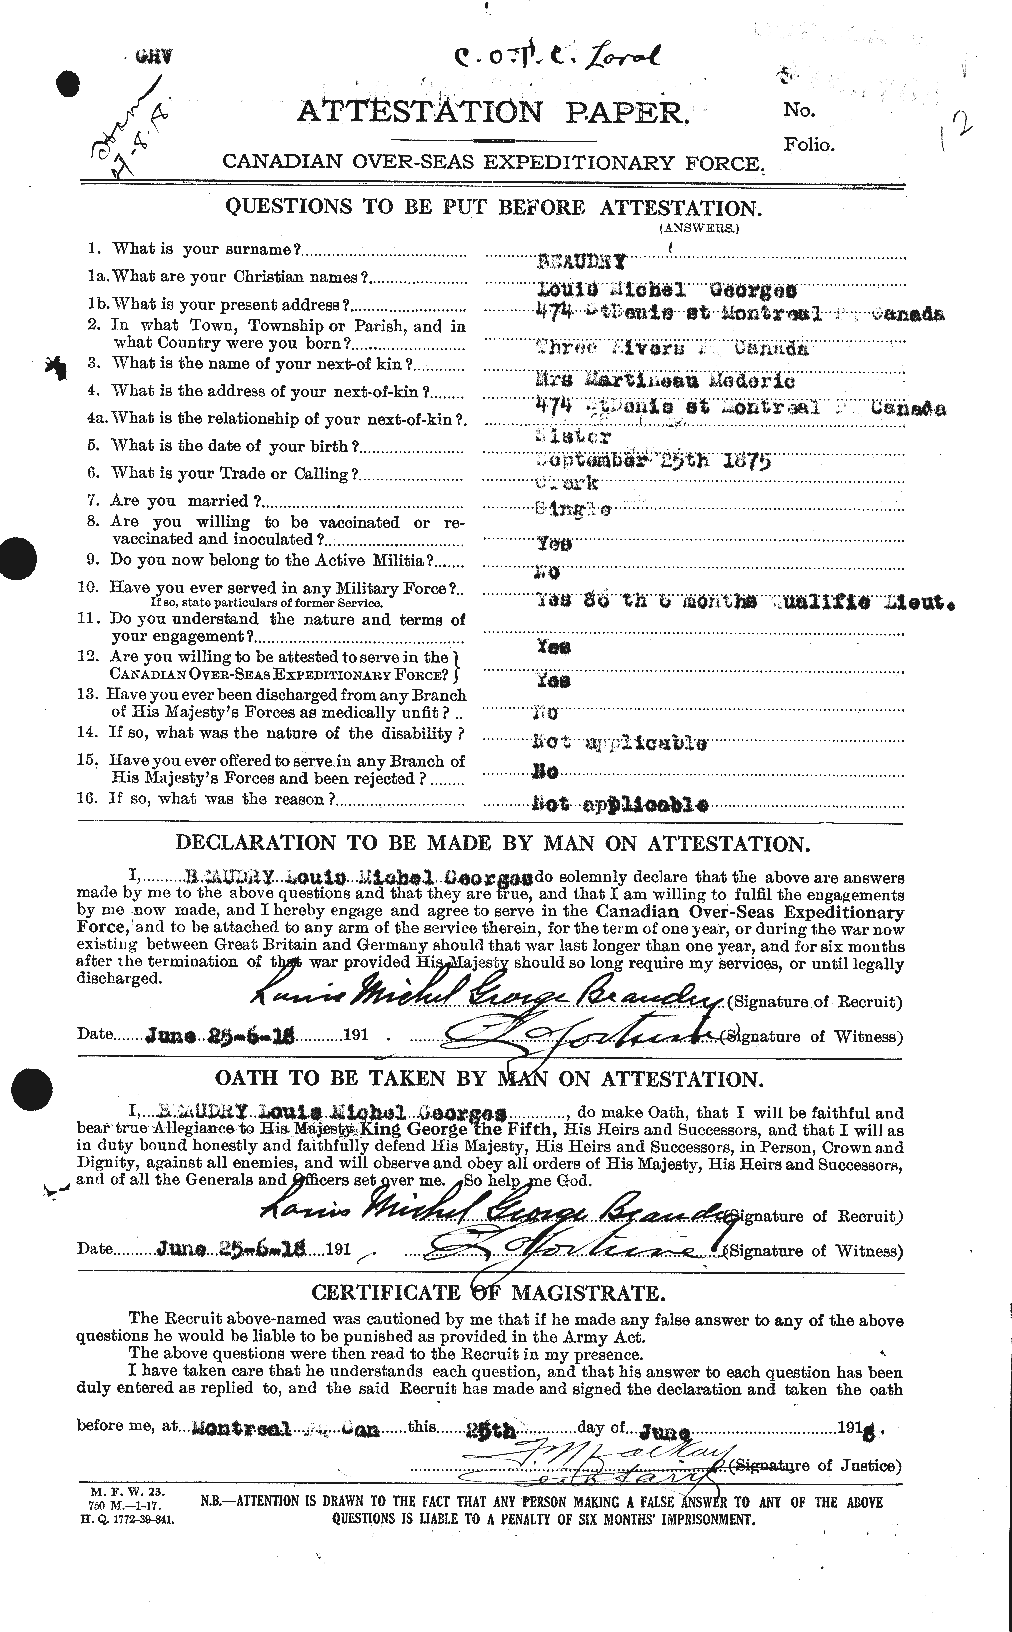 Personnel Records of the First World War - CEF 231387a